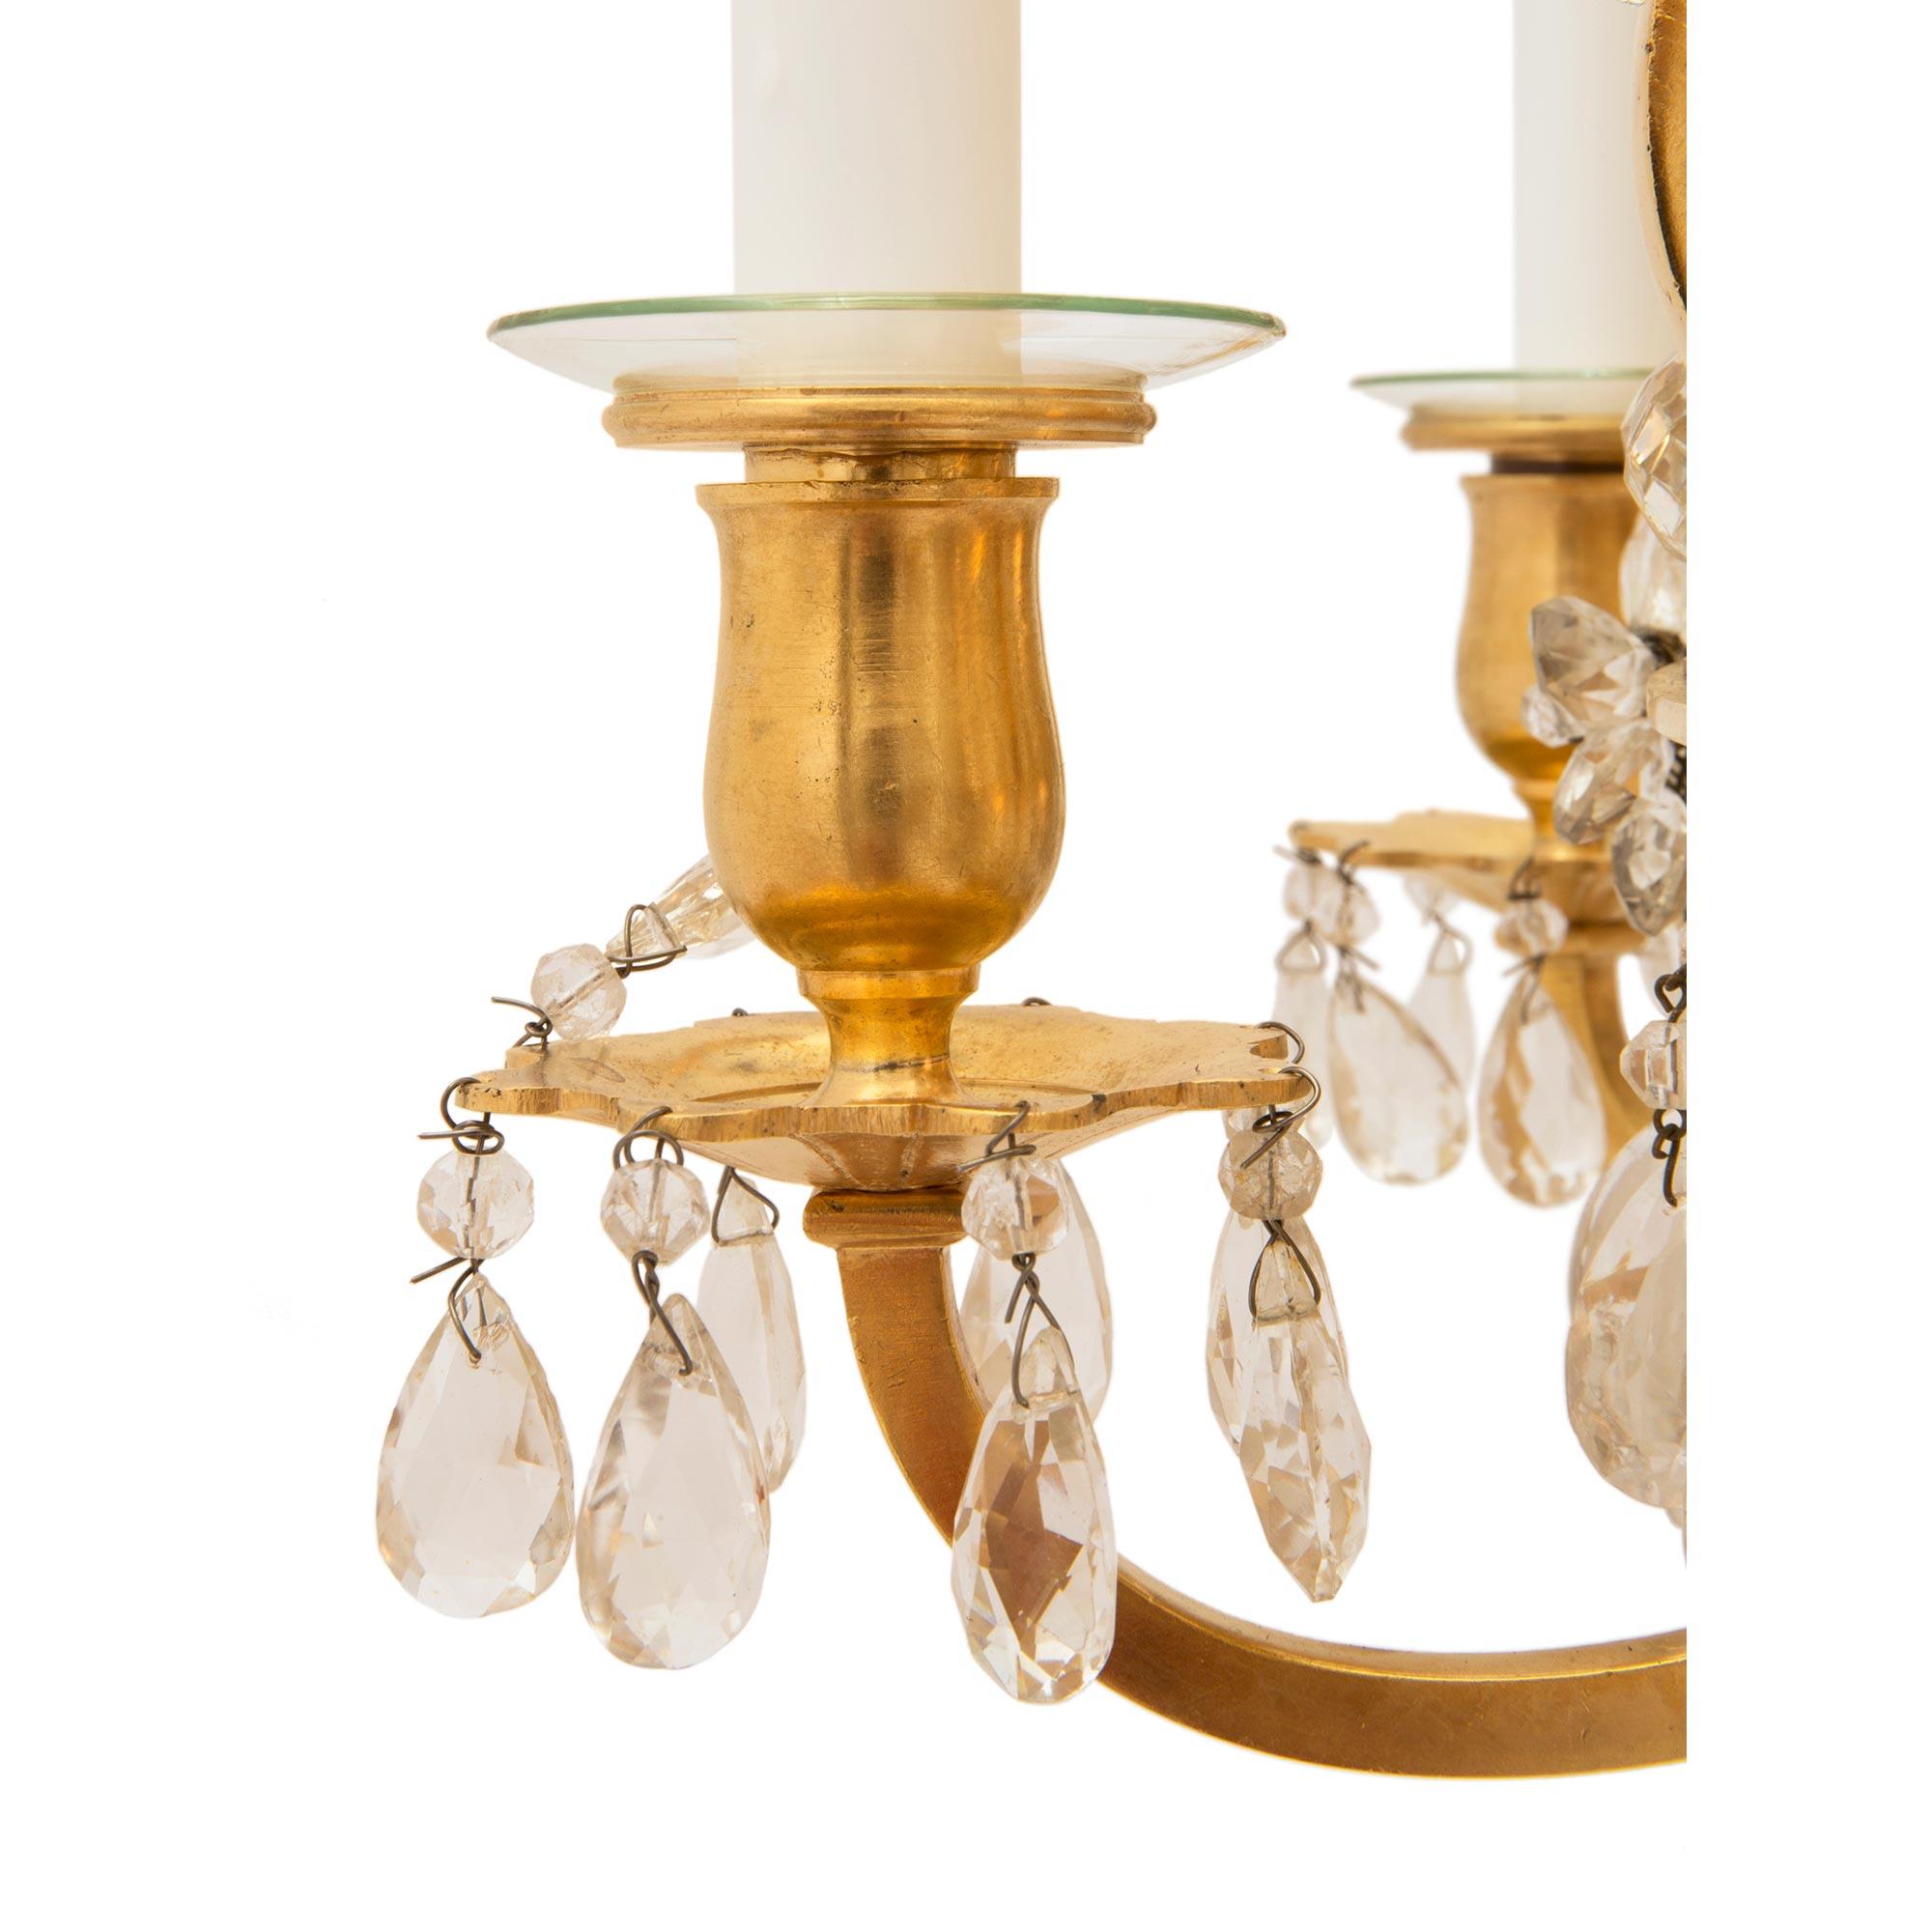 French 19th Century Louis XIV Style Ormolu, Crystal and Glass Royal Chandelier For Sale 2